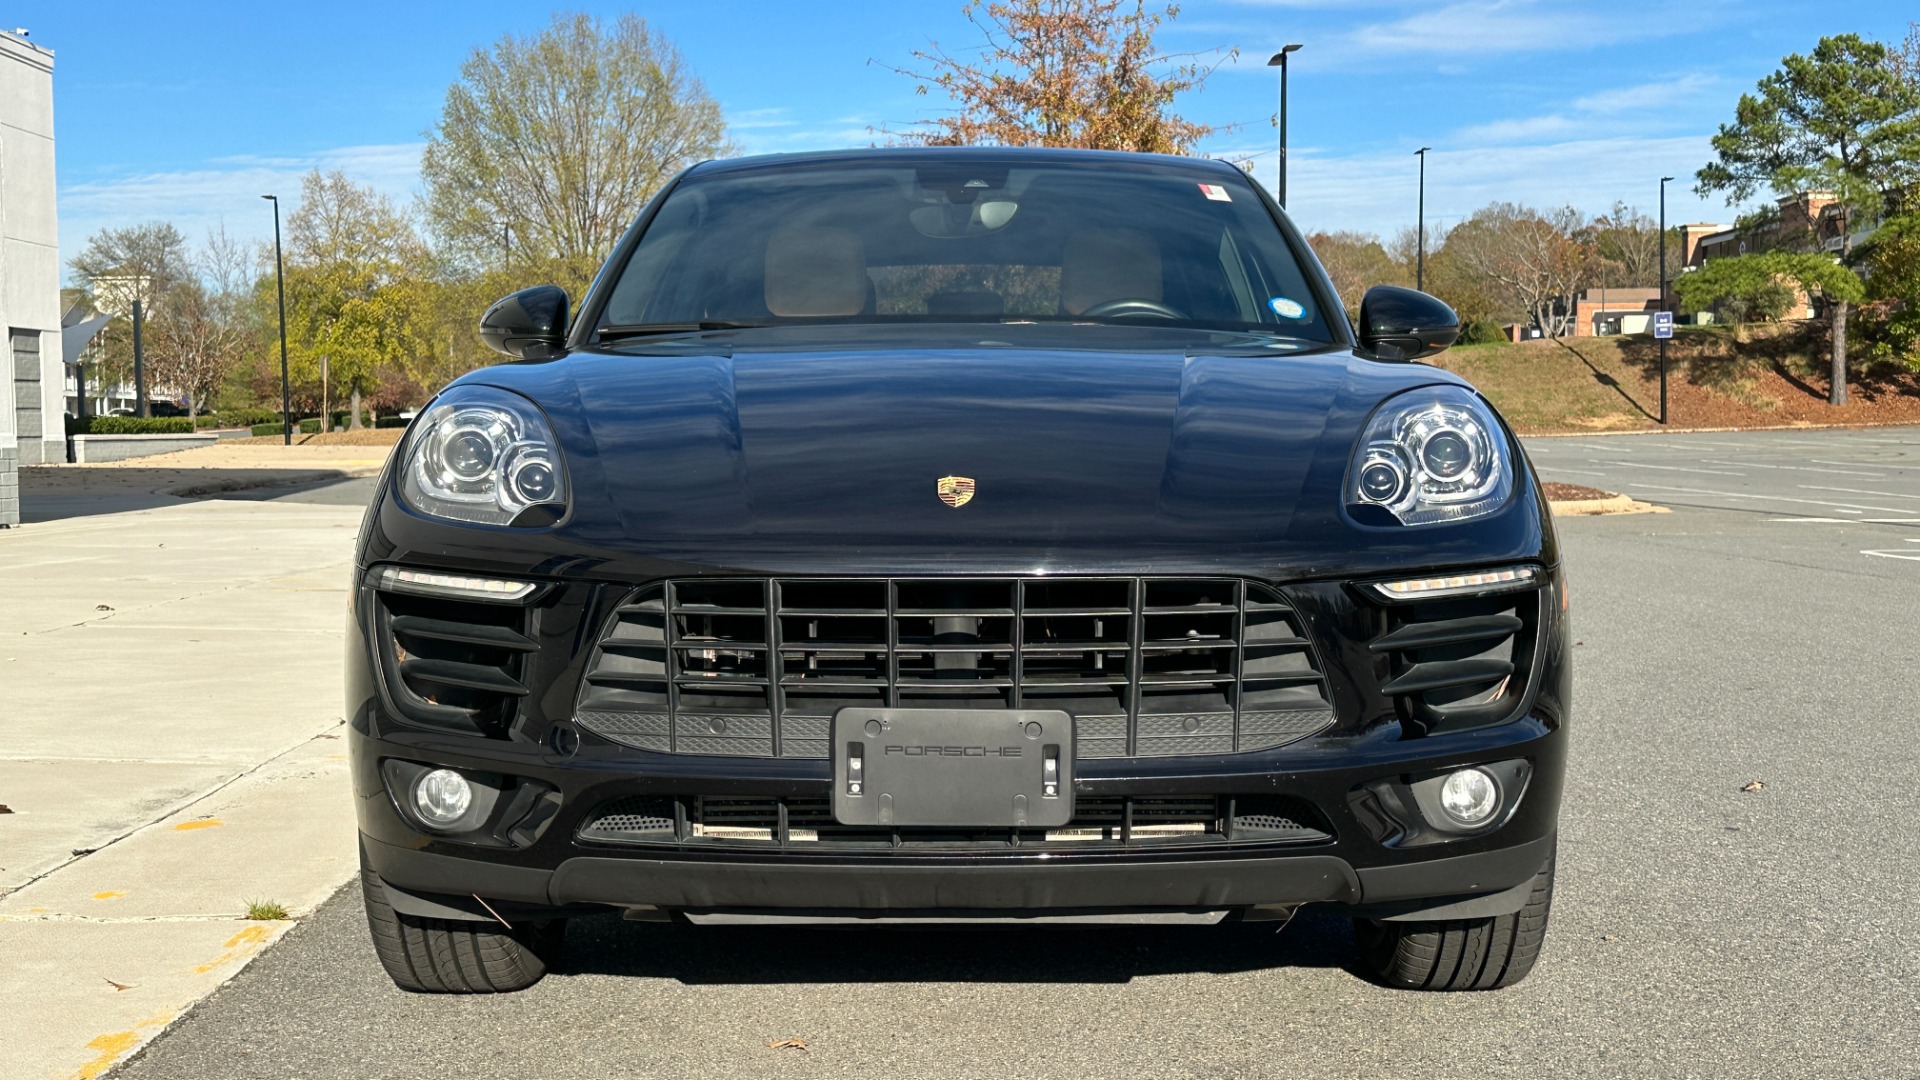 Used 2018 Porsche Macan SPORT EDITION / PREMIUM PLUS PACKAGE / BOSE SOUND / NAV / LANGE CHANGE ASSI for sale $39,900 at Formula Imports in Charlotte NC 28227 5